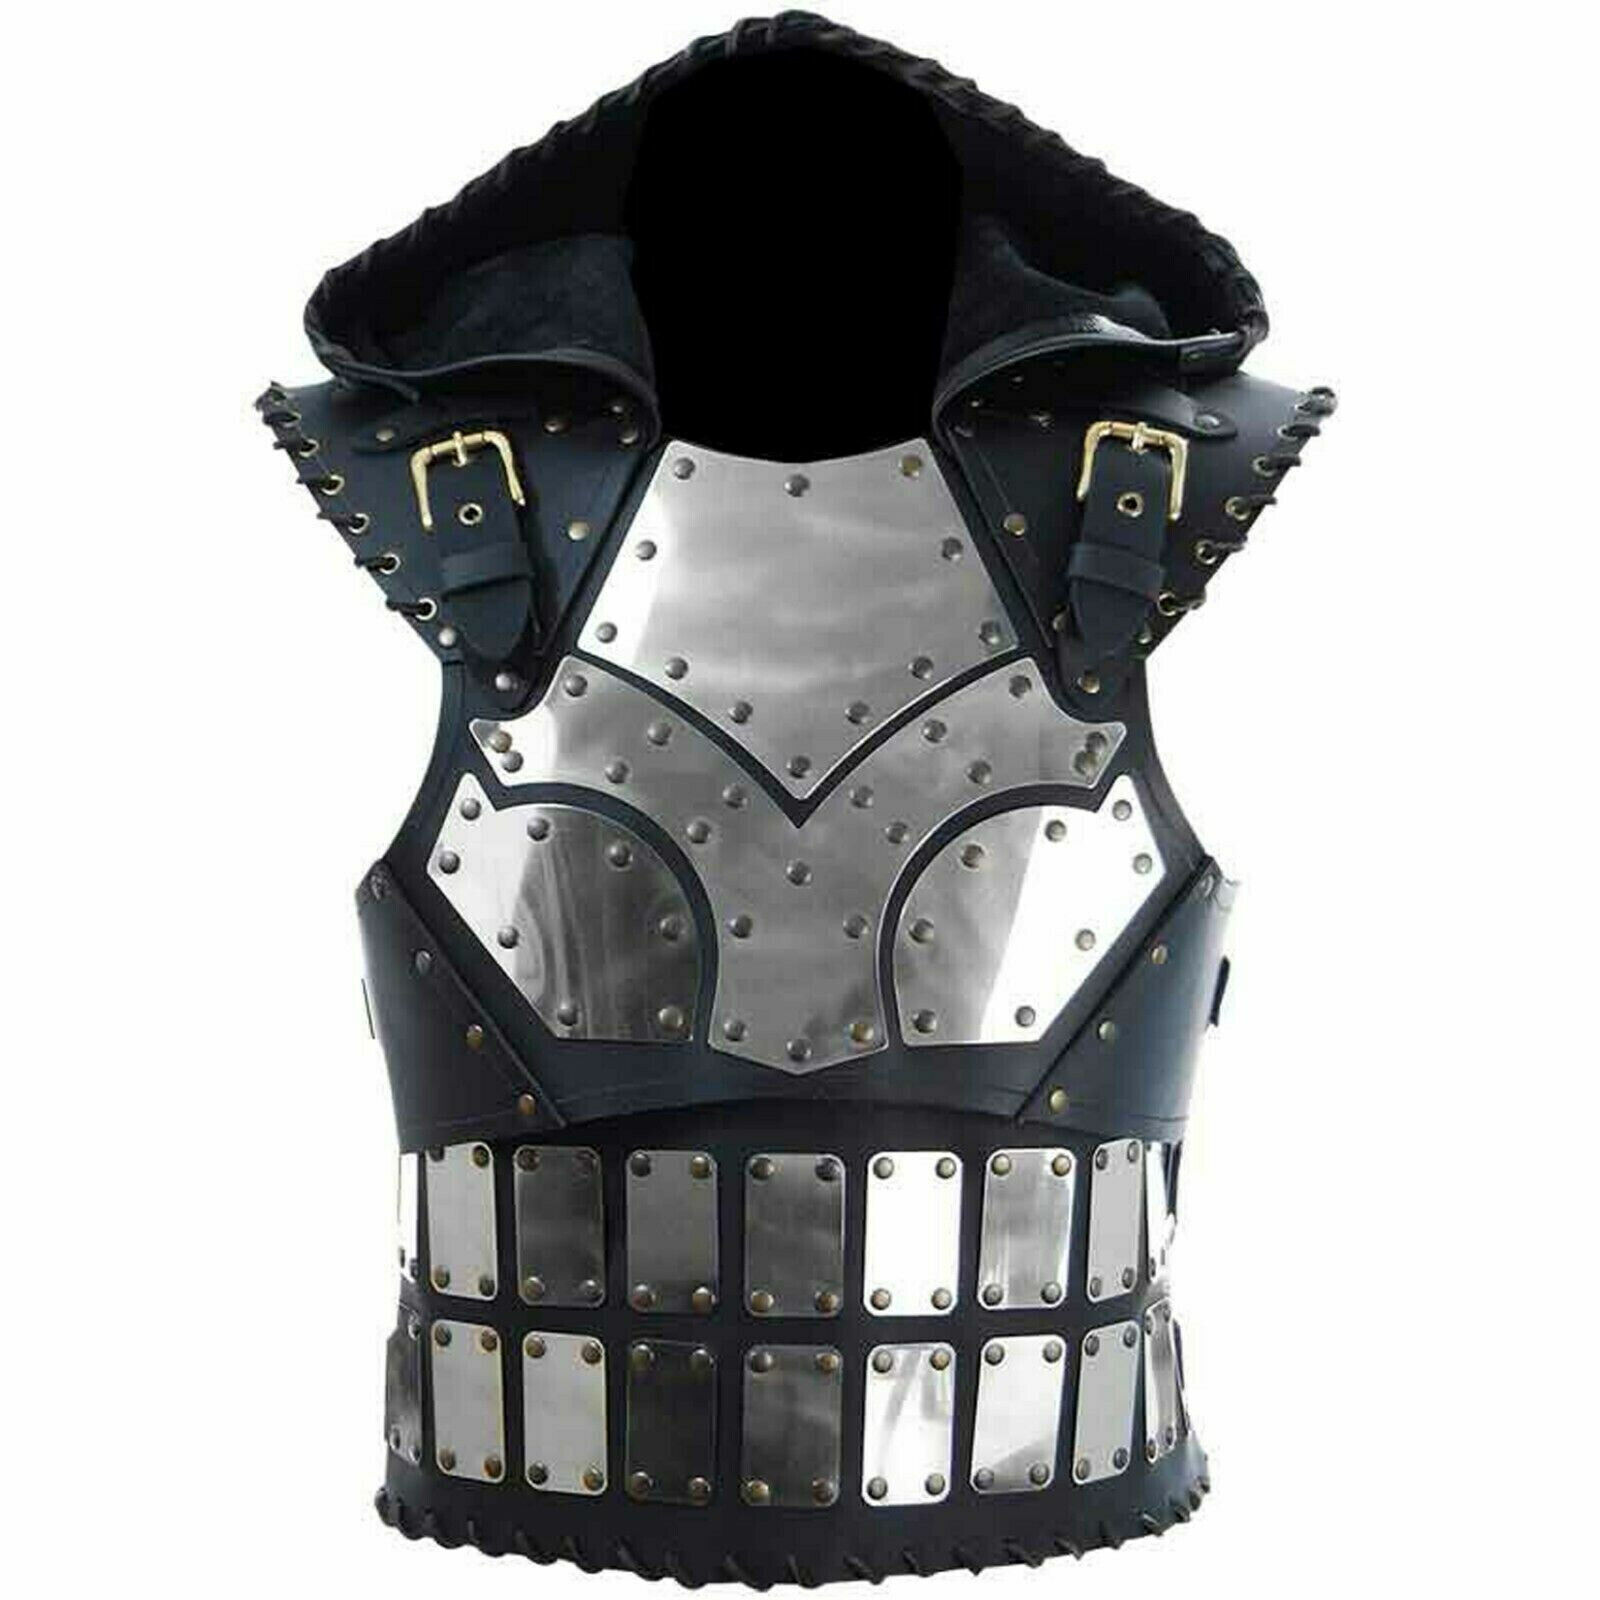 Medieval Leather Articulated Scoundrel Leather Armor Halloween Costume Armor